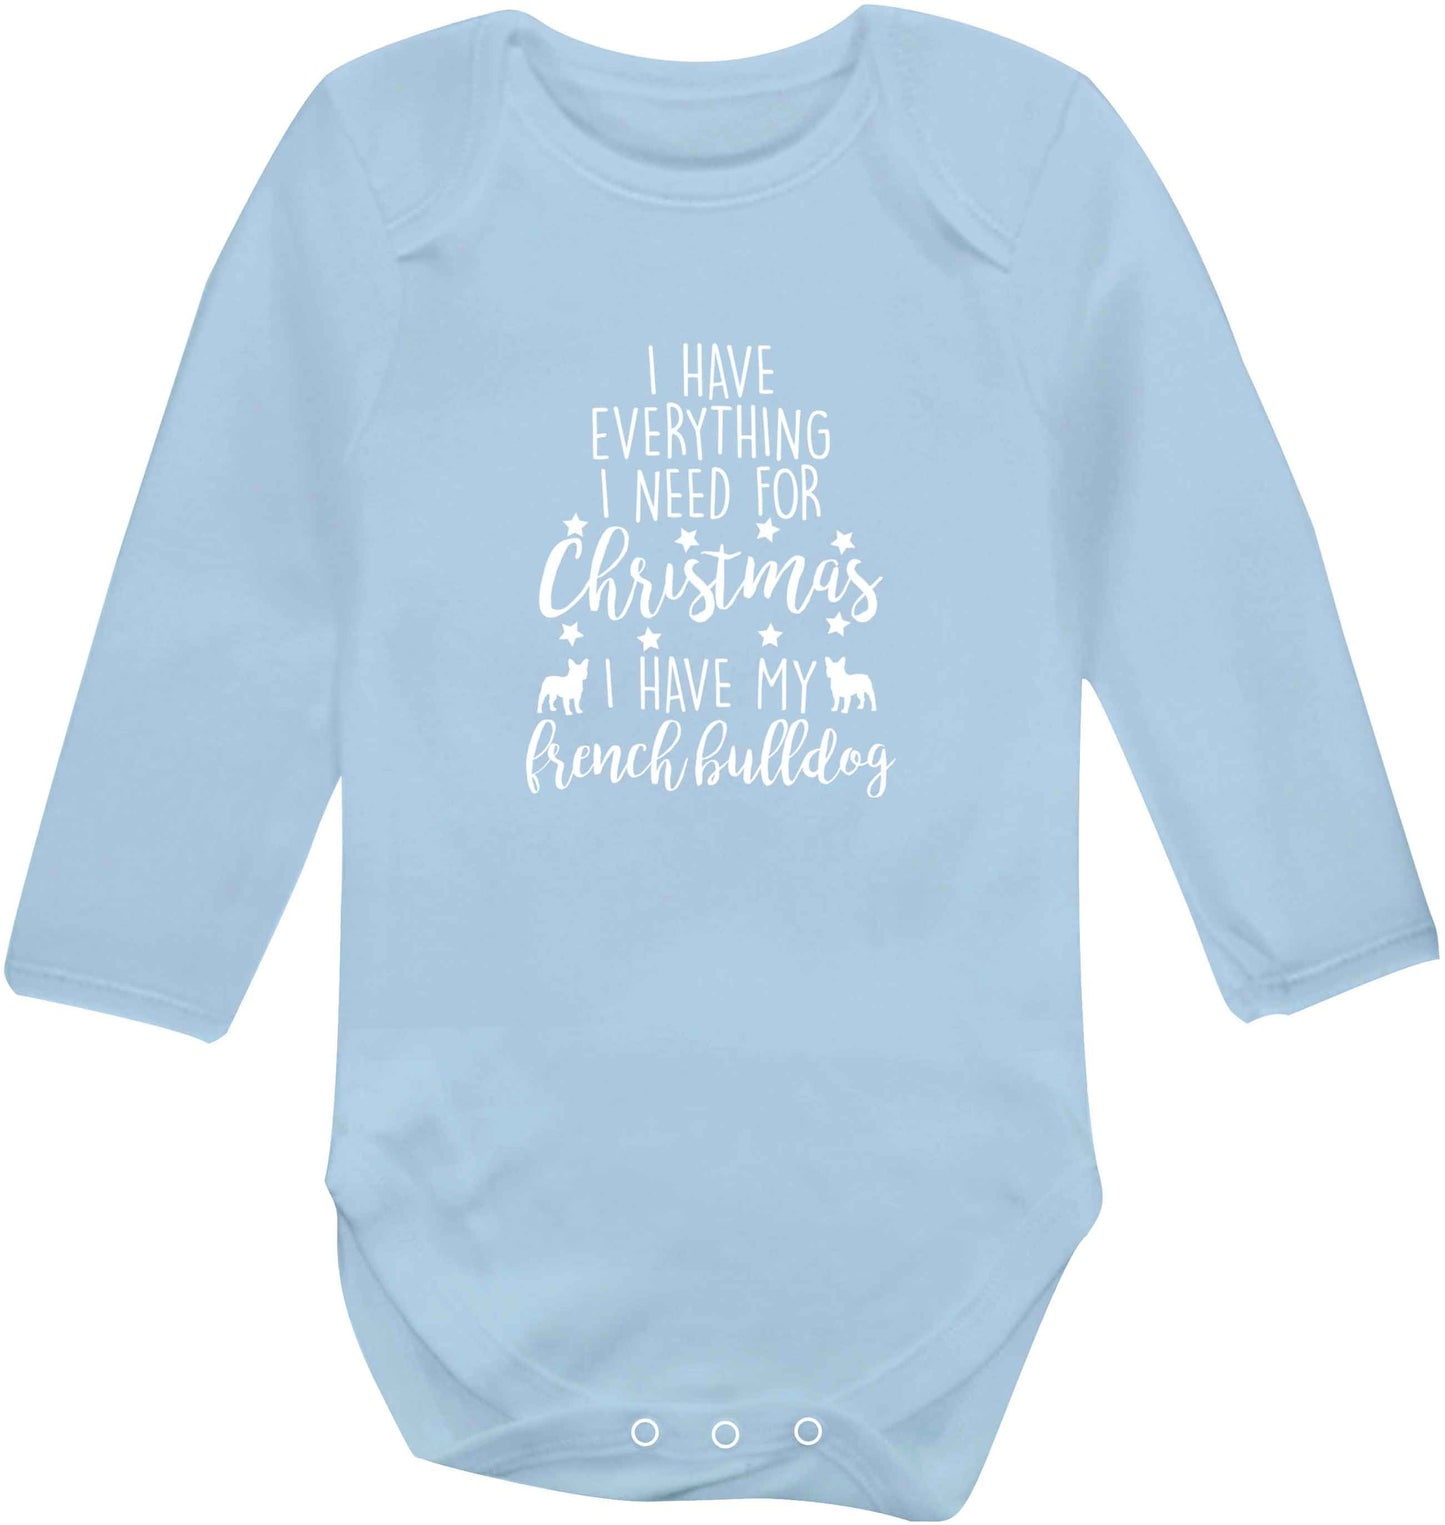 I have everything I need for Christmas I have my french bulldog baby vest long sleeved pale blue 6-12 months